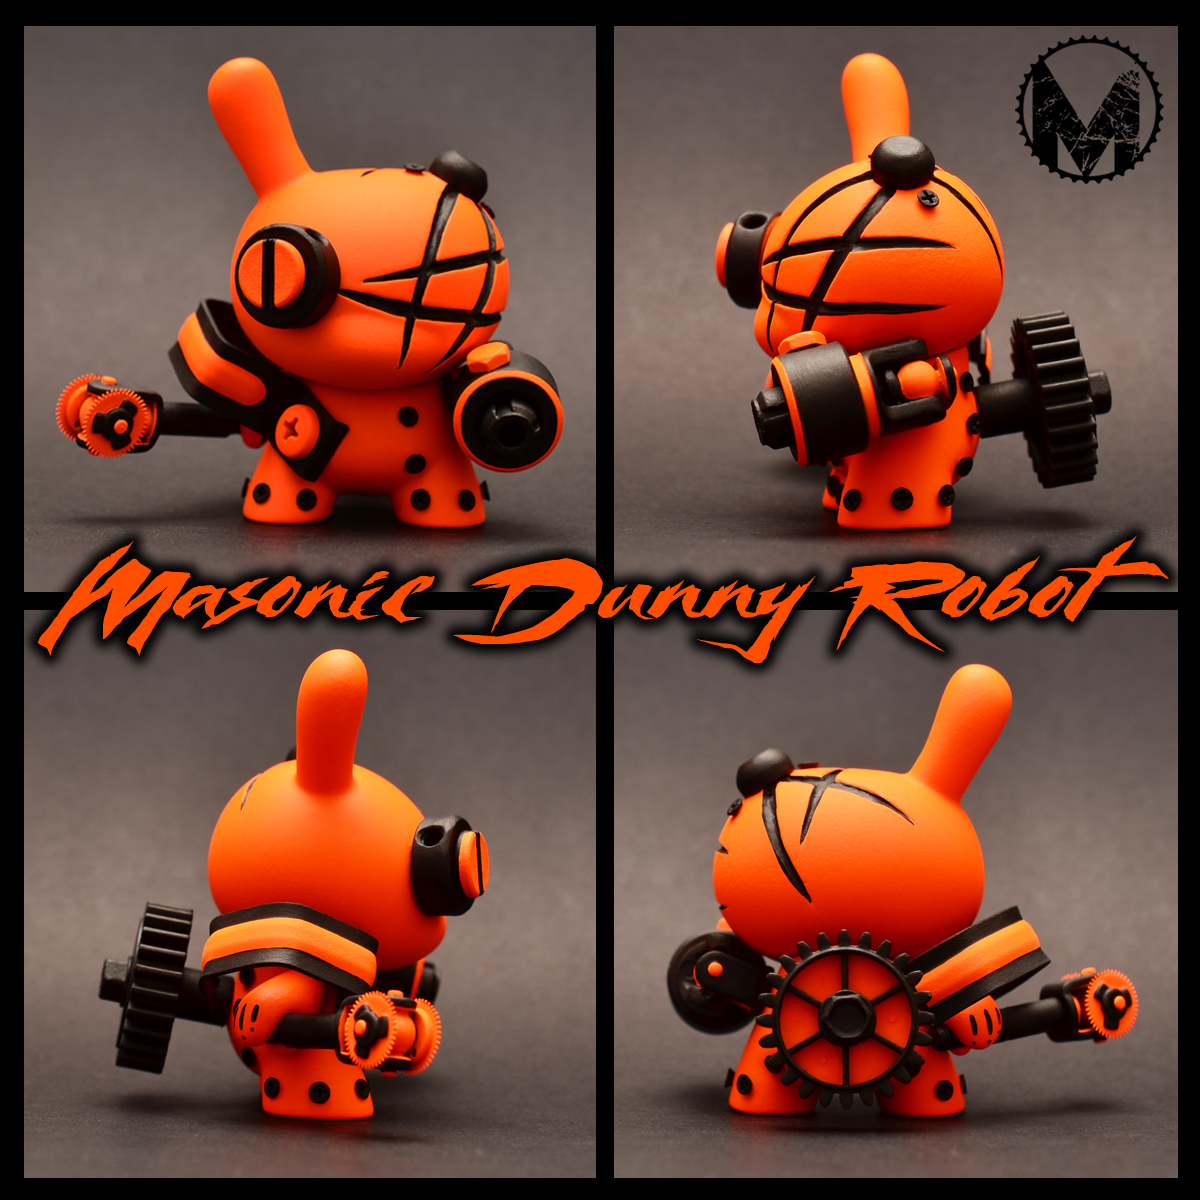 MindoftheMasons   Kidrobot Dunny robot Masonic Dunny Robot mdr vinyl toy designer toy toy abstract Hand Painted